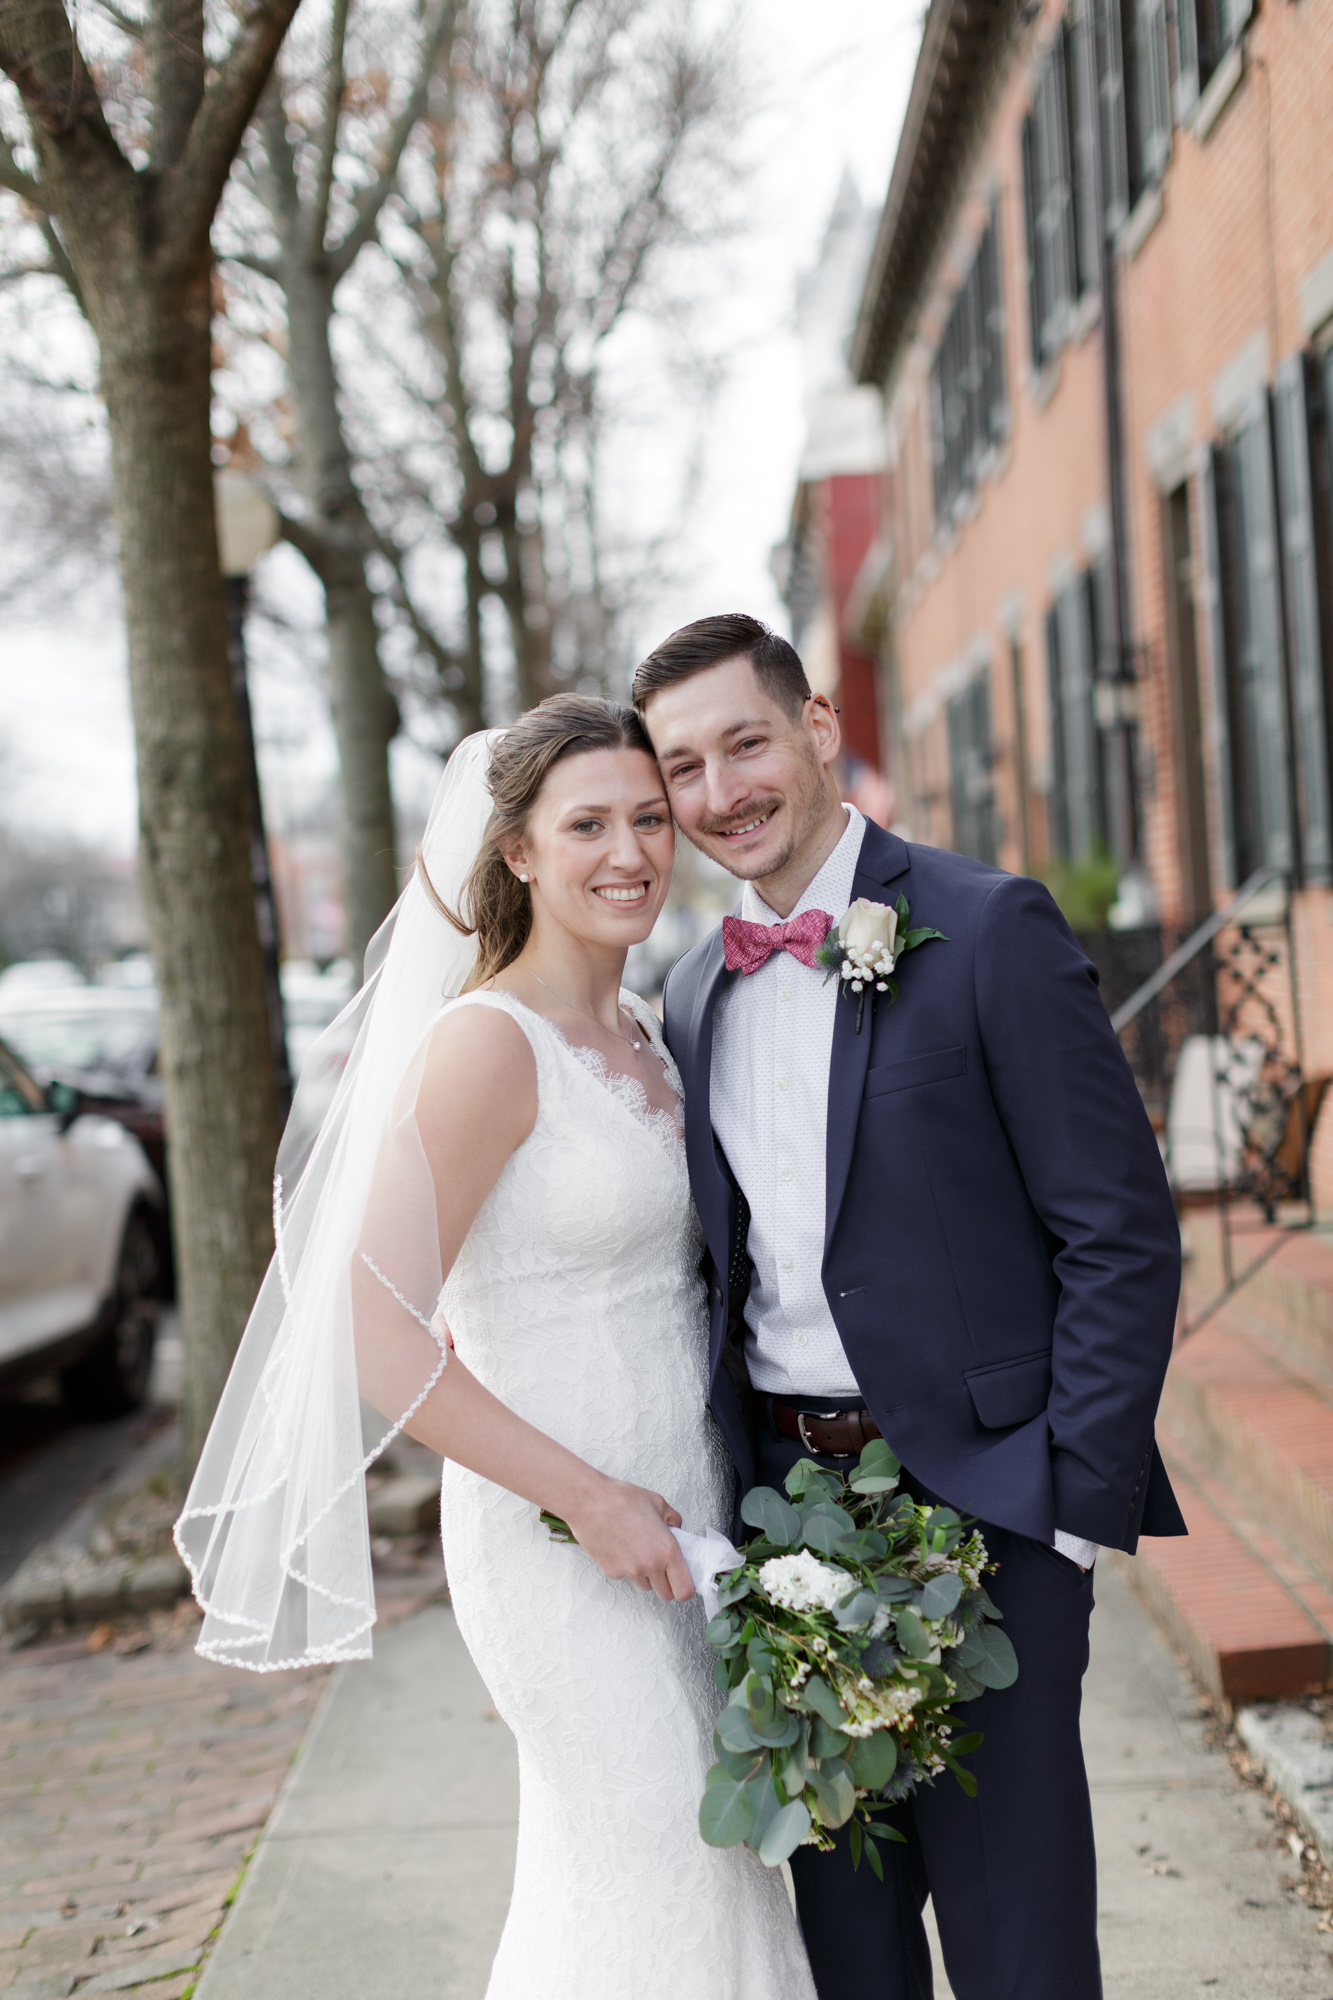 Elegant bride and groom pose for a portrait after their wedding at Old City Hall in Bordentown, NJ